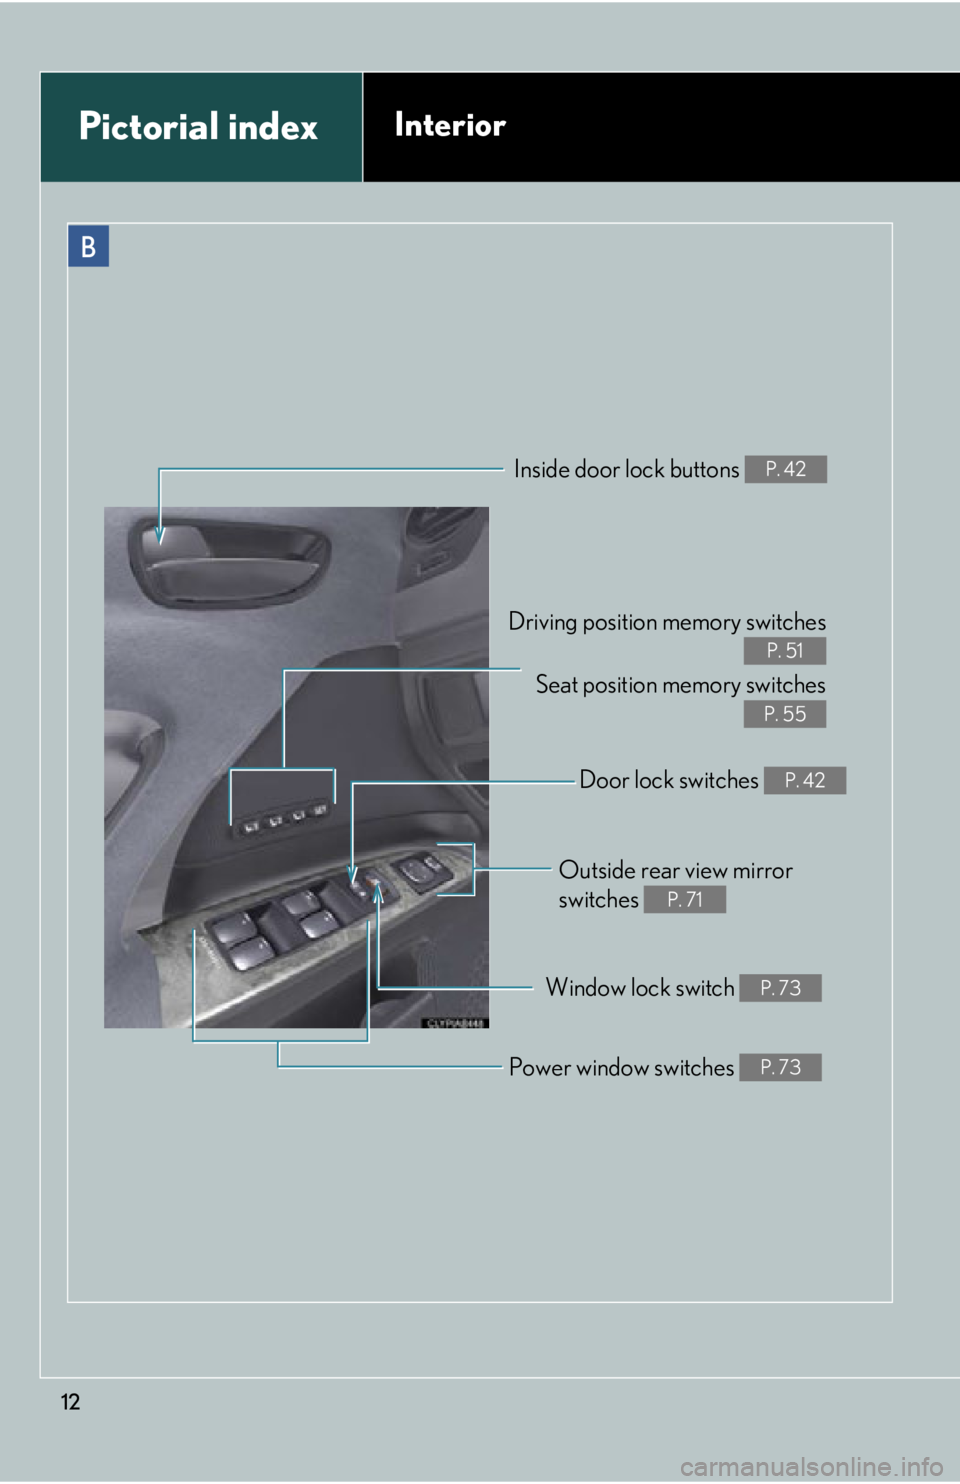 Lexus IS F 2011  Instrument Cluster / LEXUS 2011 IS F OWNERS MANUAL (OM53893U) 12
B
Driving position memory switchesSeat position  memory switches
P. 51
P. 55
Inside door lock buttons P. 42
Outside rear view mirror 
switches 
P. 71
Window lock switch P. 73
Power window switches 